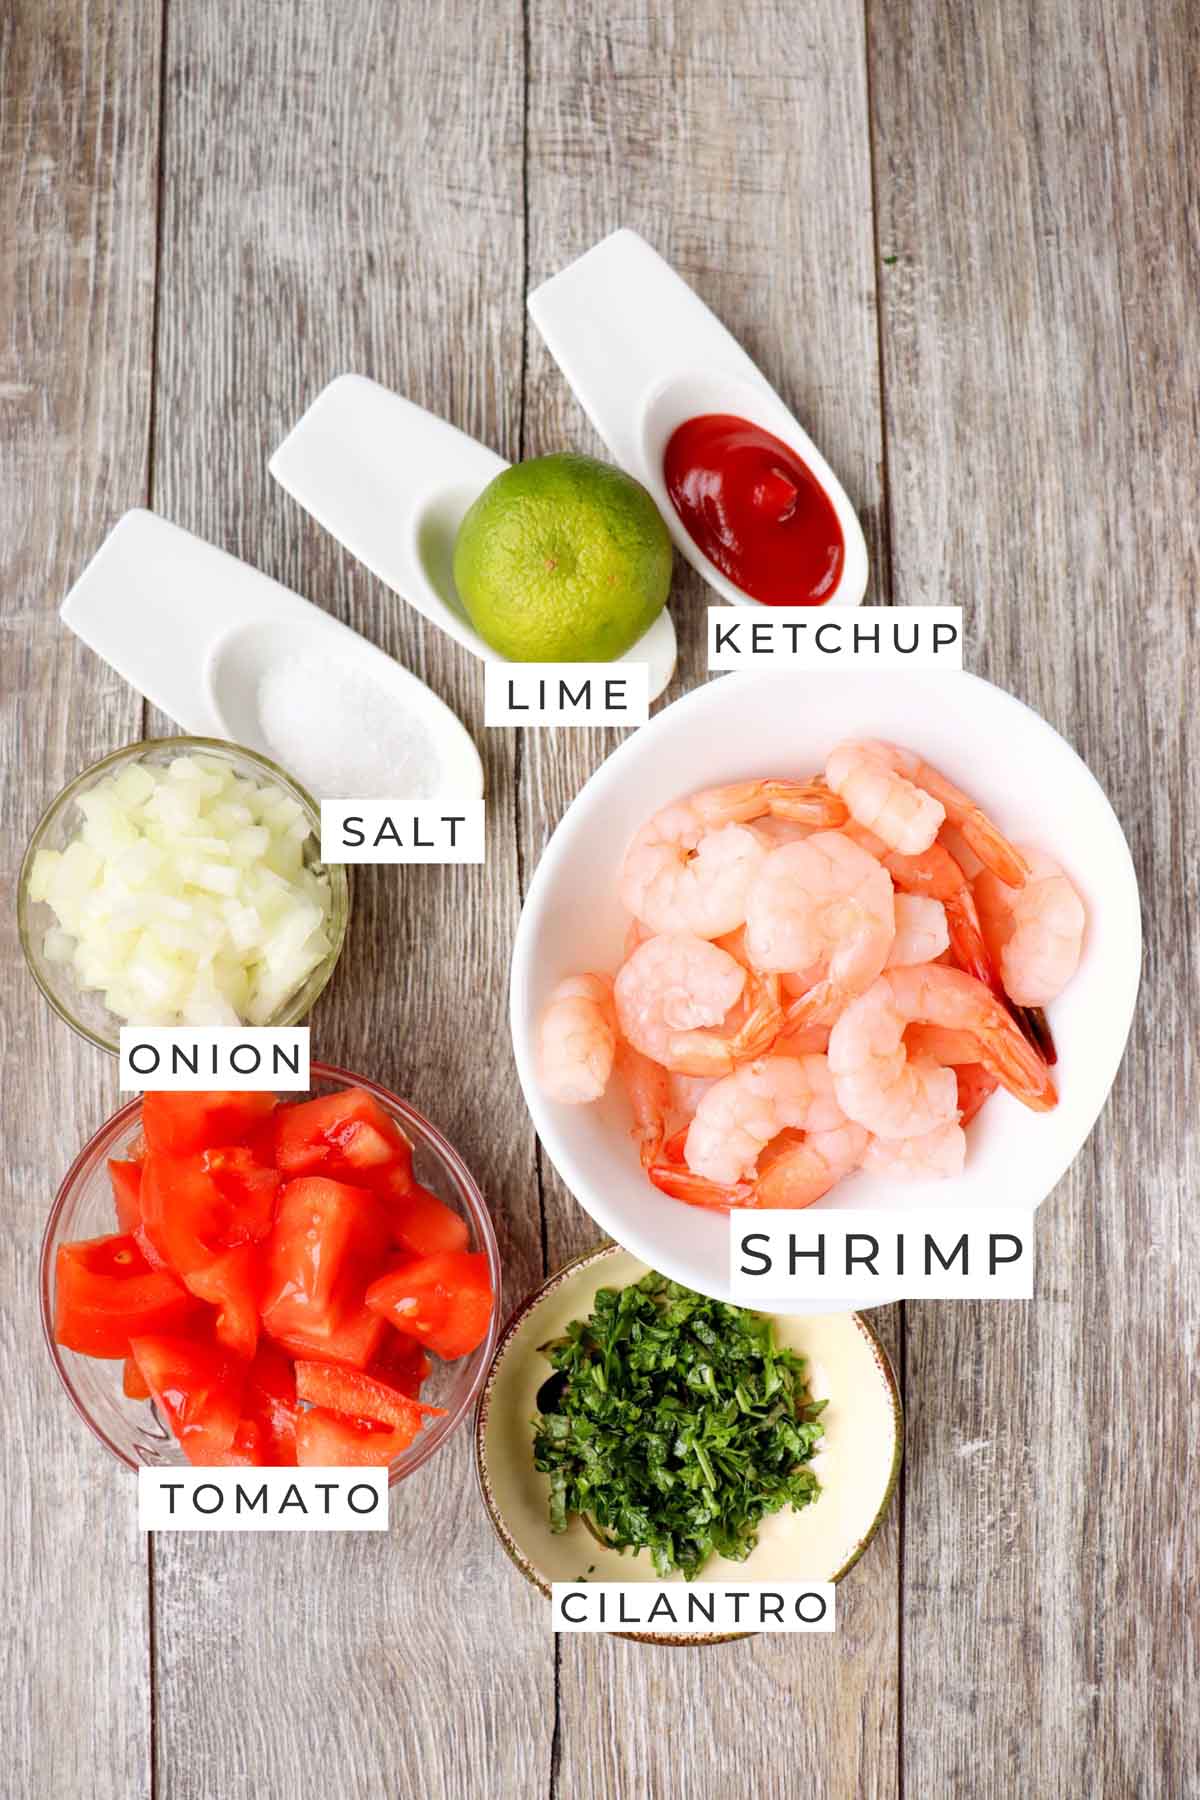 Labeled ingredients for the shrimp ceviche.